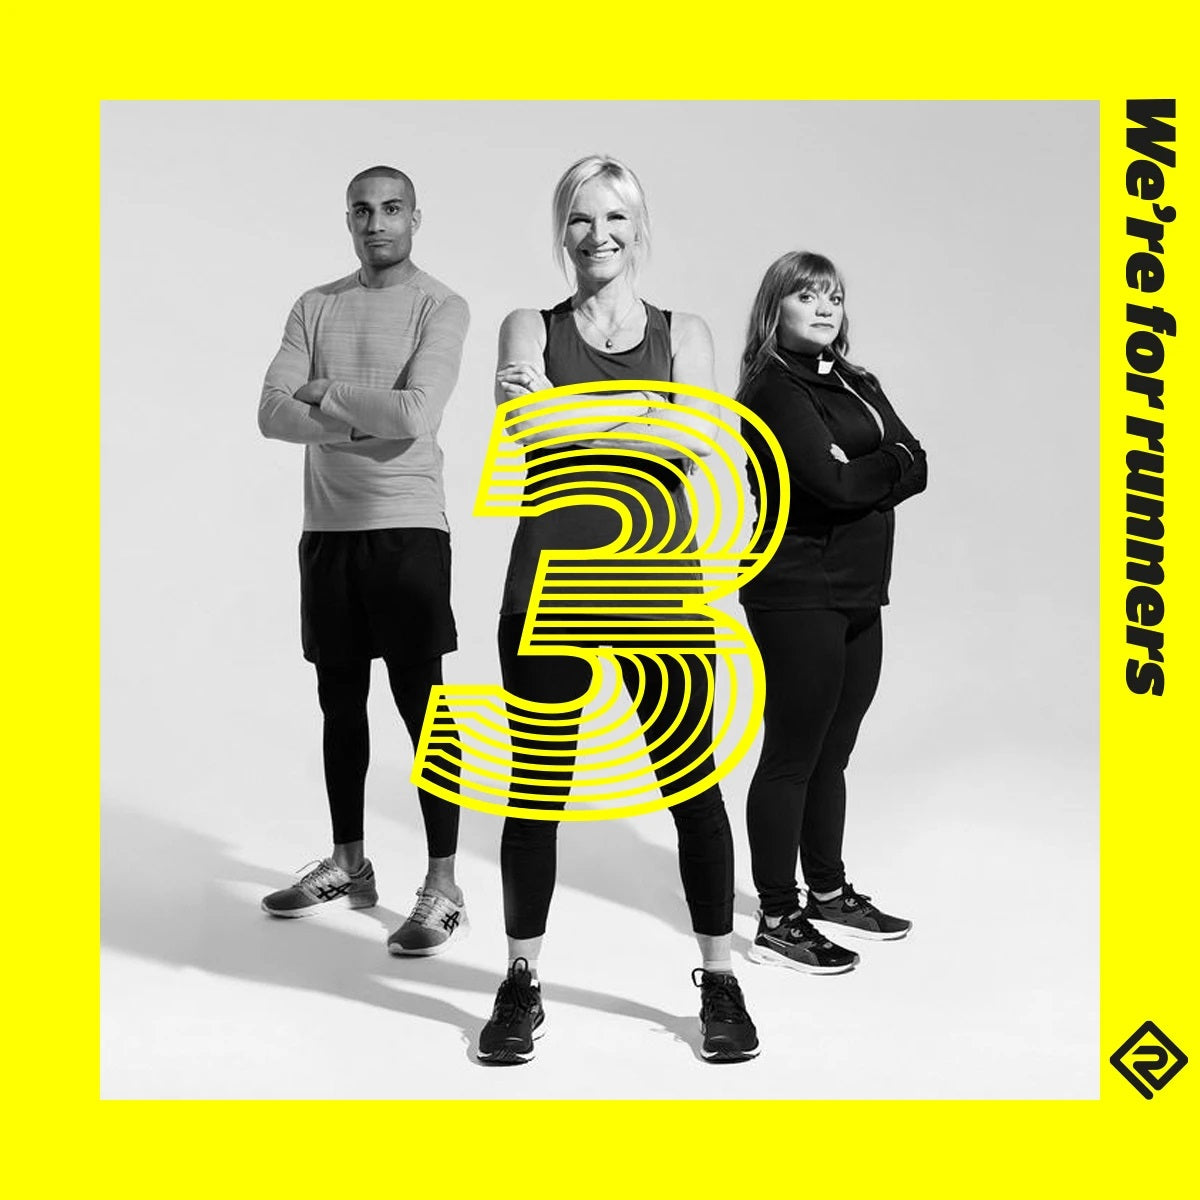 #3 Dare2Tri – Jo Whiley, Reverend Kate Bottley & Richie Anderson